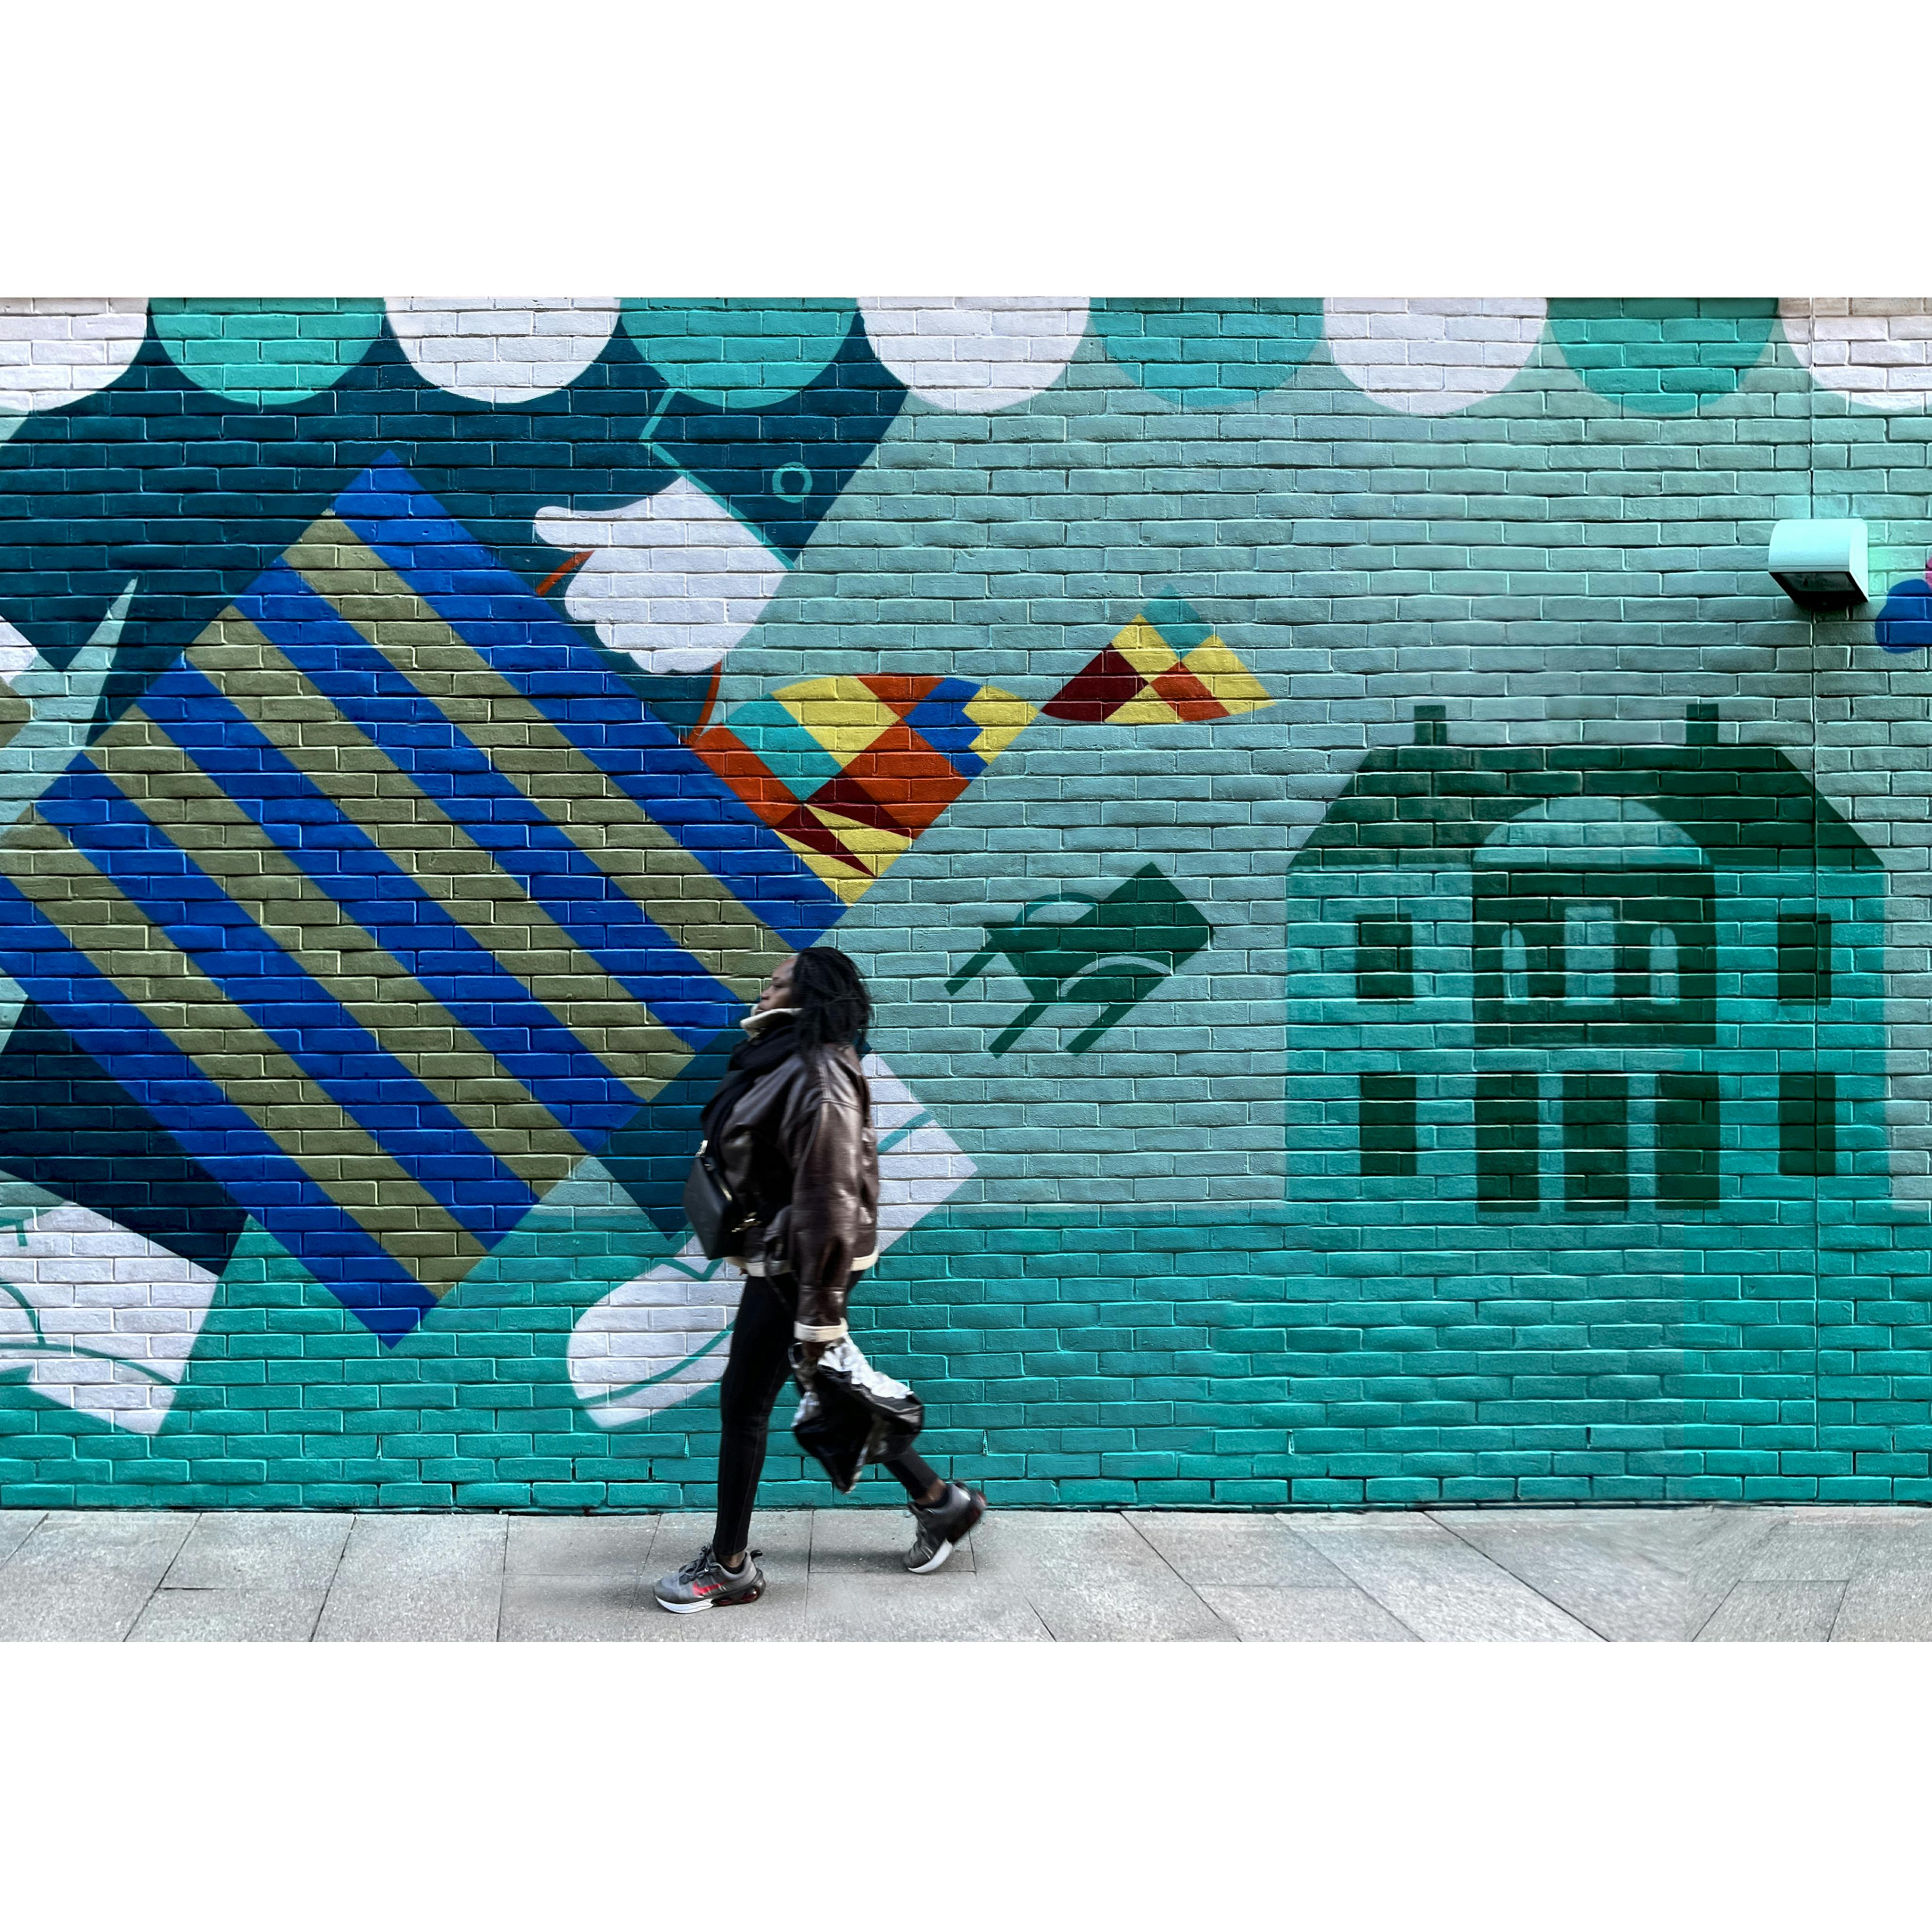 A Stroll Through Enfield Town Mural. Created by artist Anna Nicolo and commissioned through the Curate Enfield programme